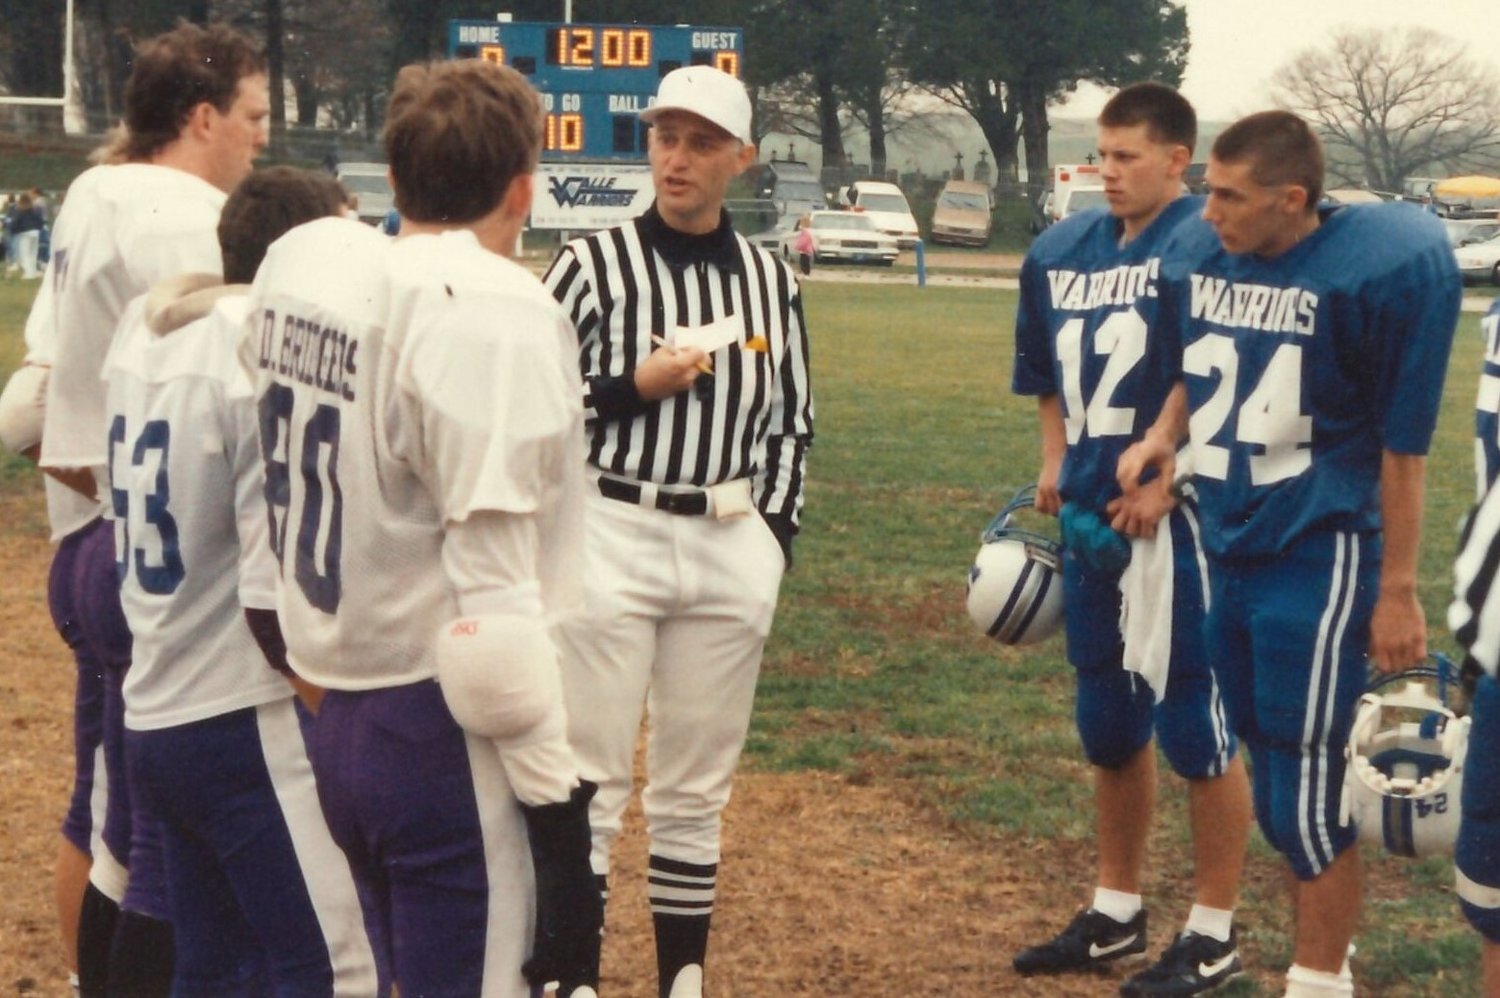 David Sturm officiates a semi-final football game at Valle Catholic High School in Ste. Genevieve in the early 2000s.